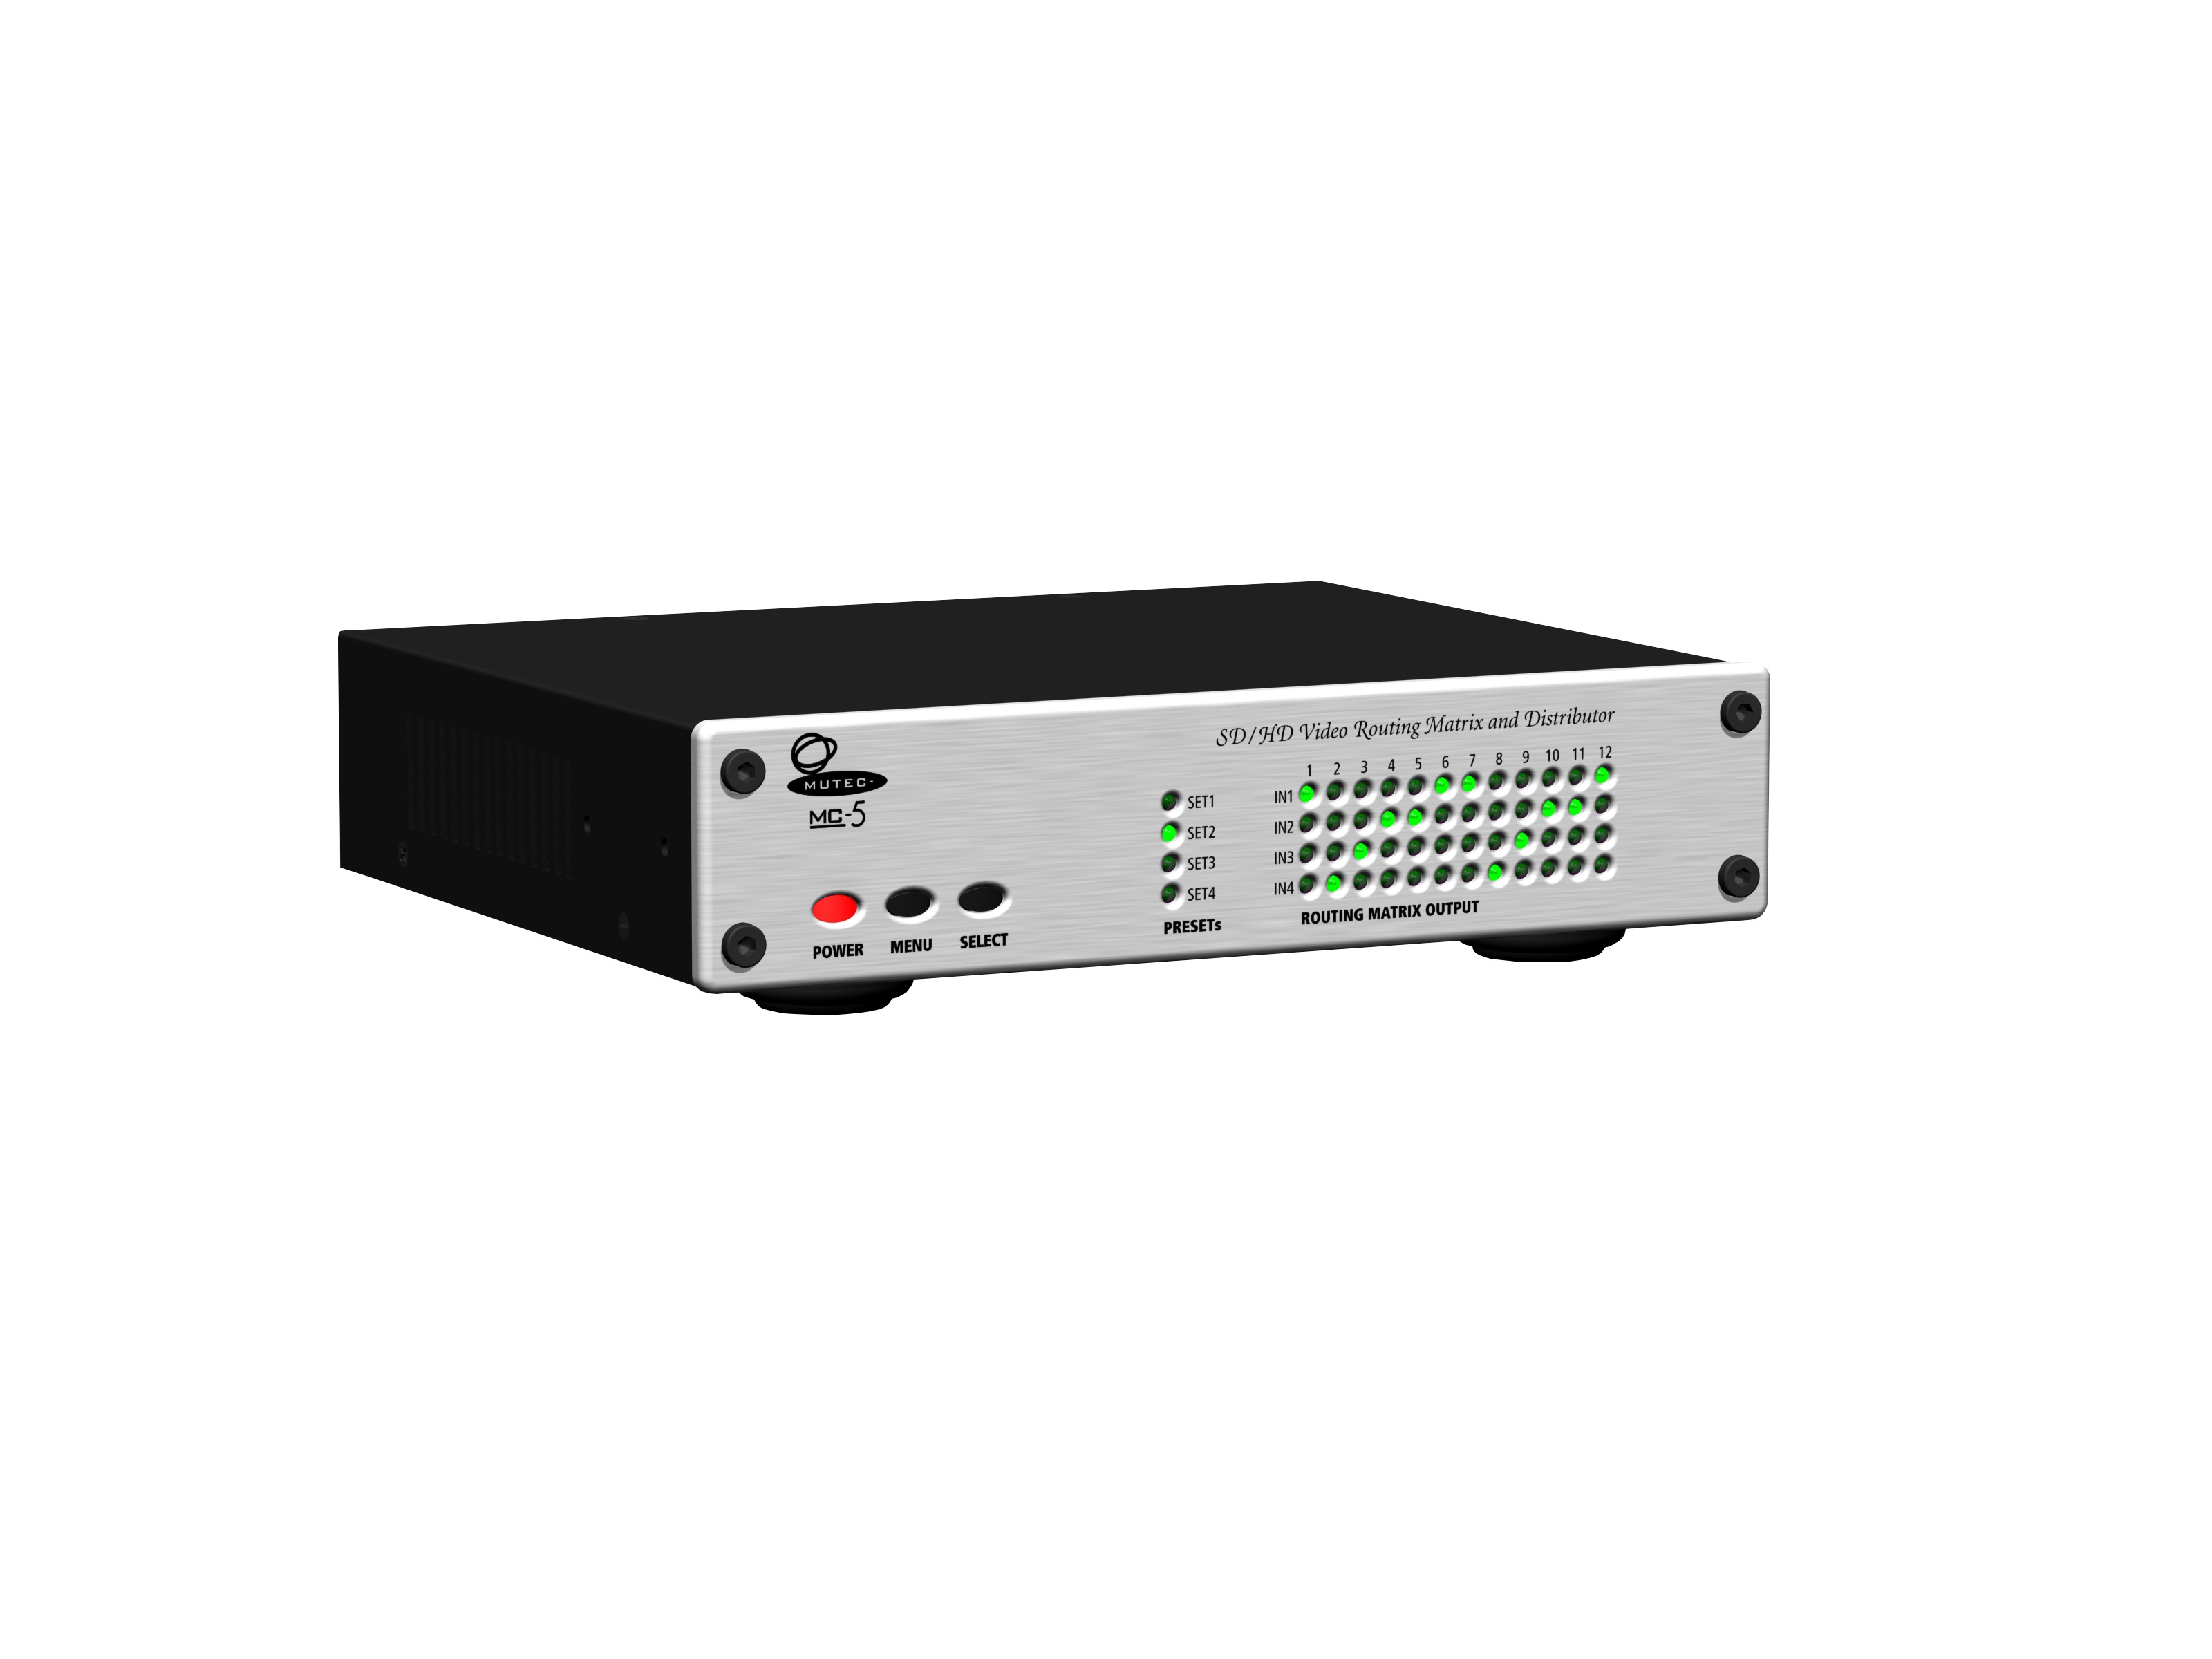 MC5 SD/HD Video Routing Matrix and Distributor by Mutec